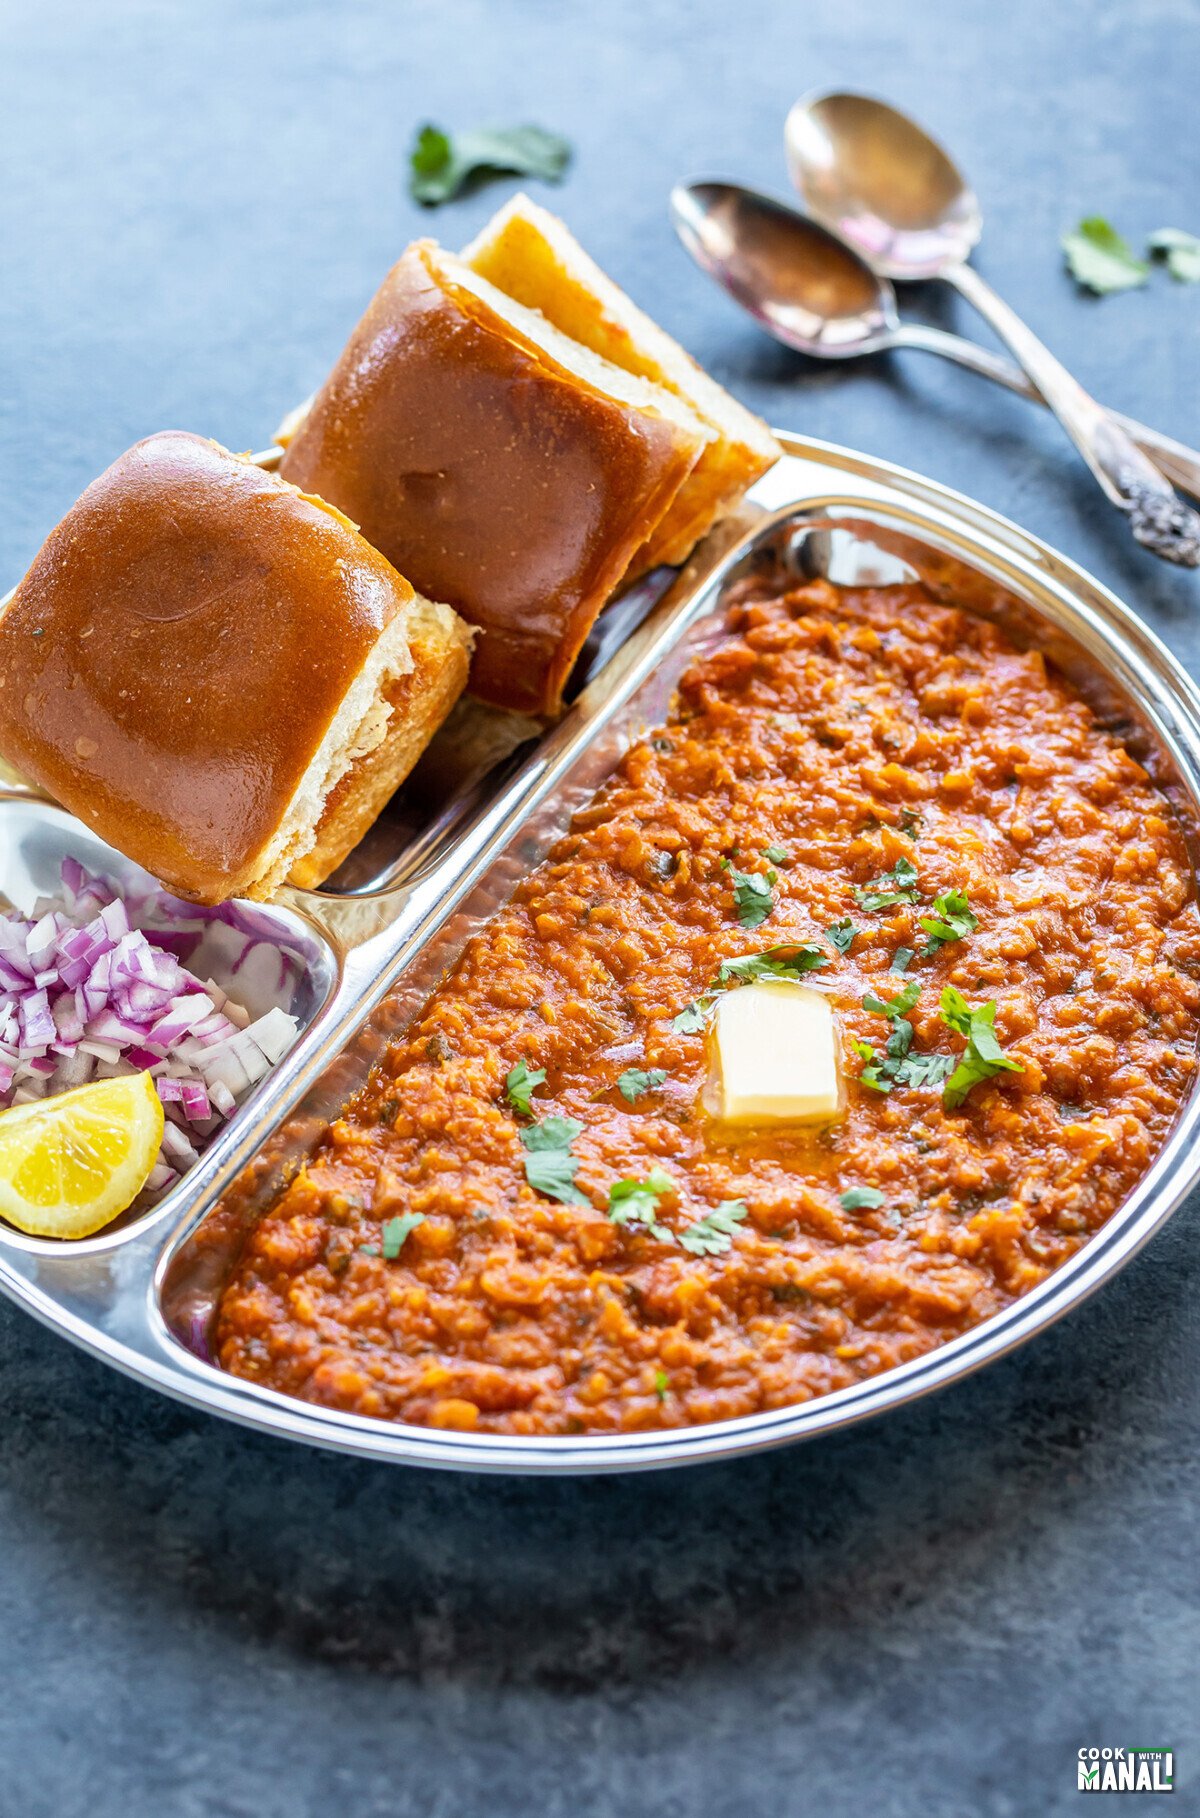 pav bhaji served in a steel plate with chopped onion and a pat of butter on top of bhaji